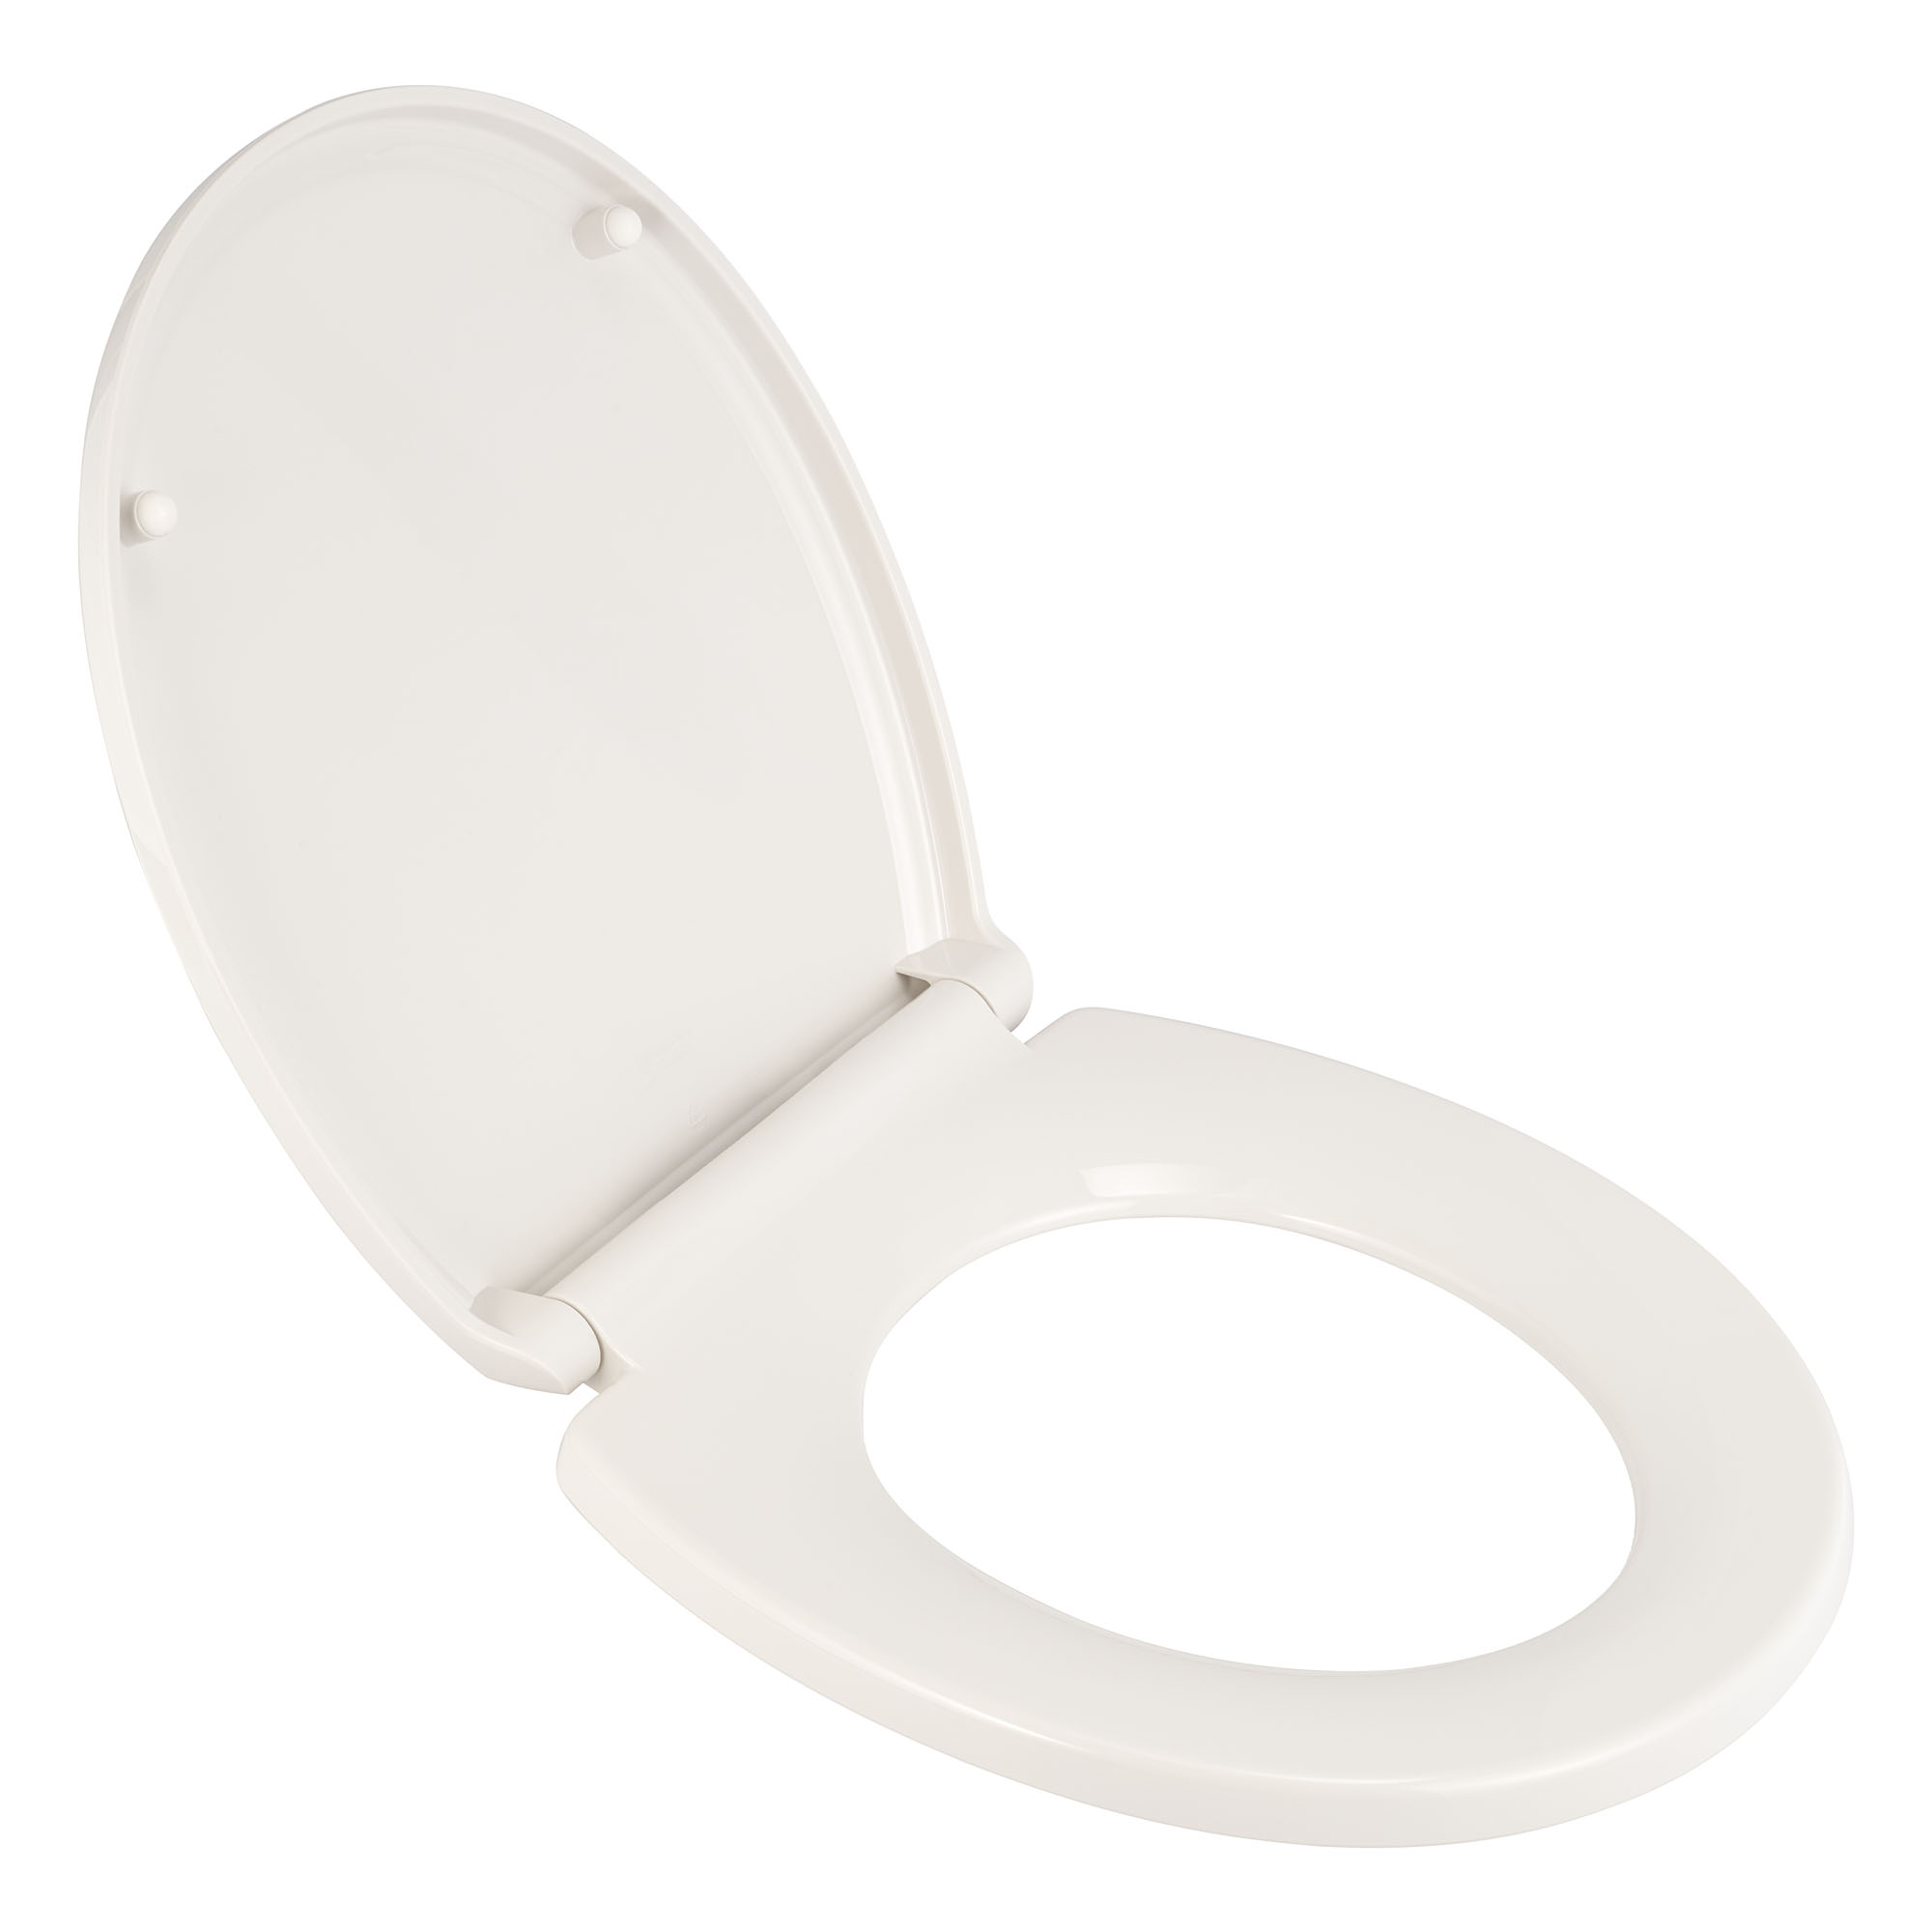 Traditional Slow-Close & Easy Lift-Off Round Front Toilet Seat